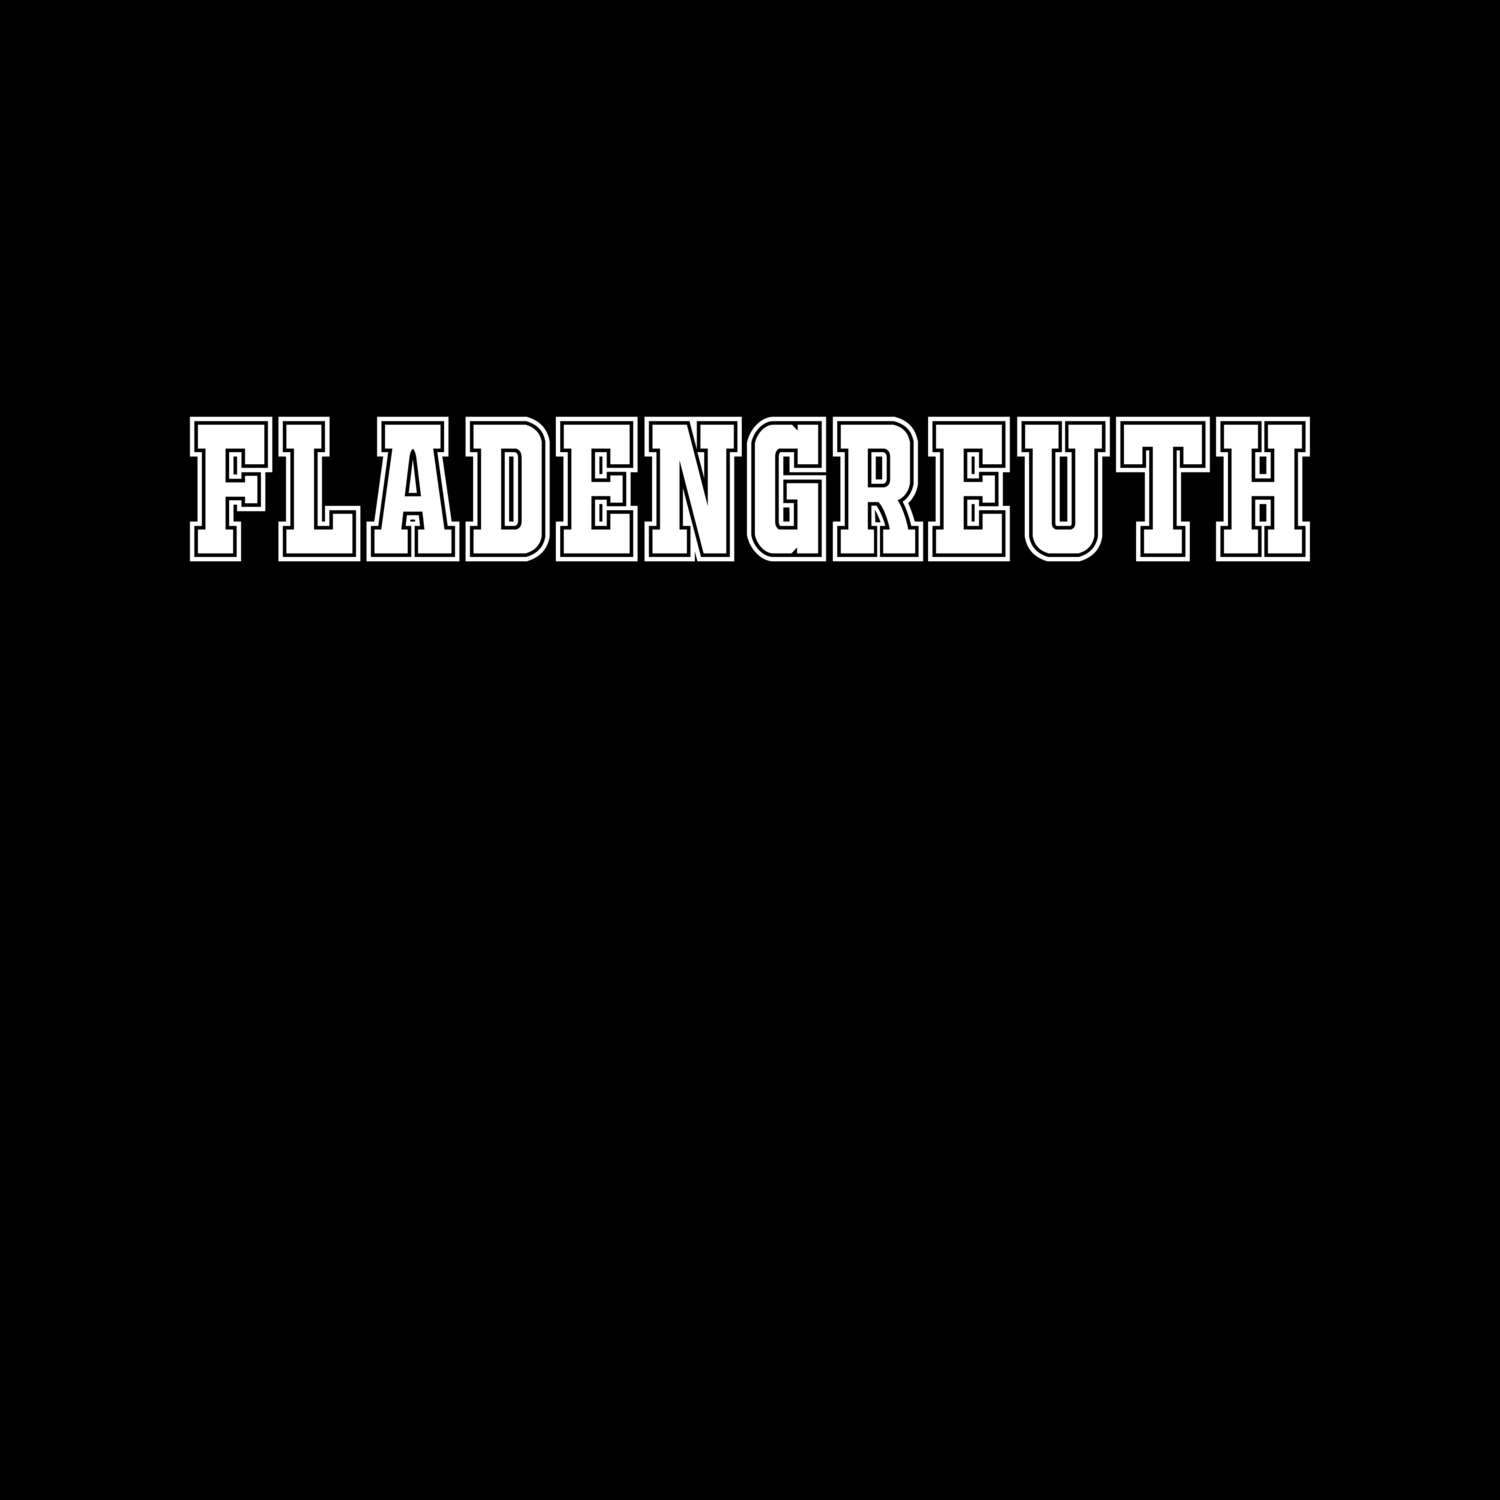 Fladengreuth T-Shirt »Classic«